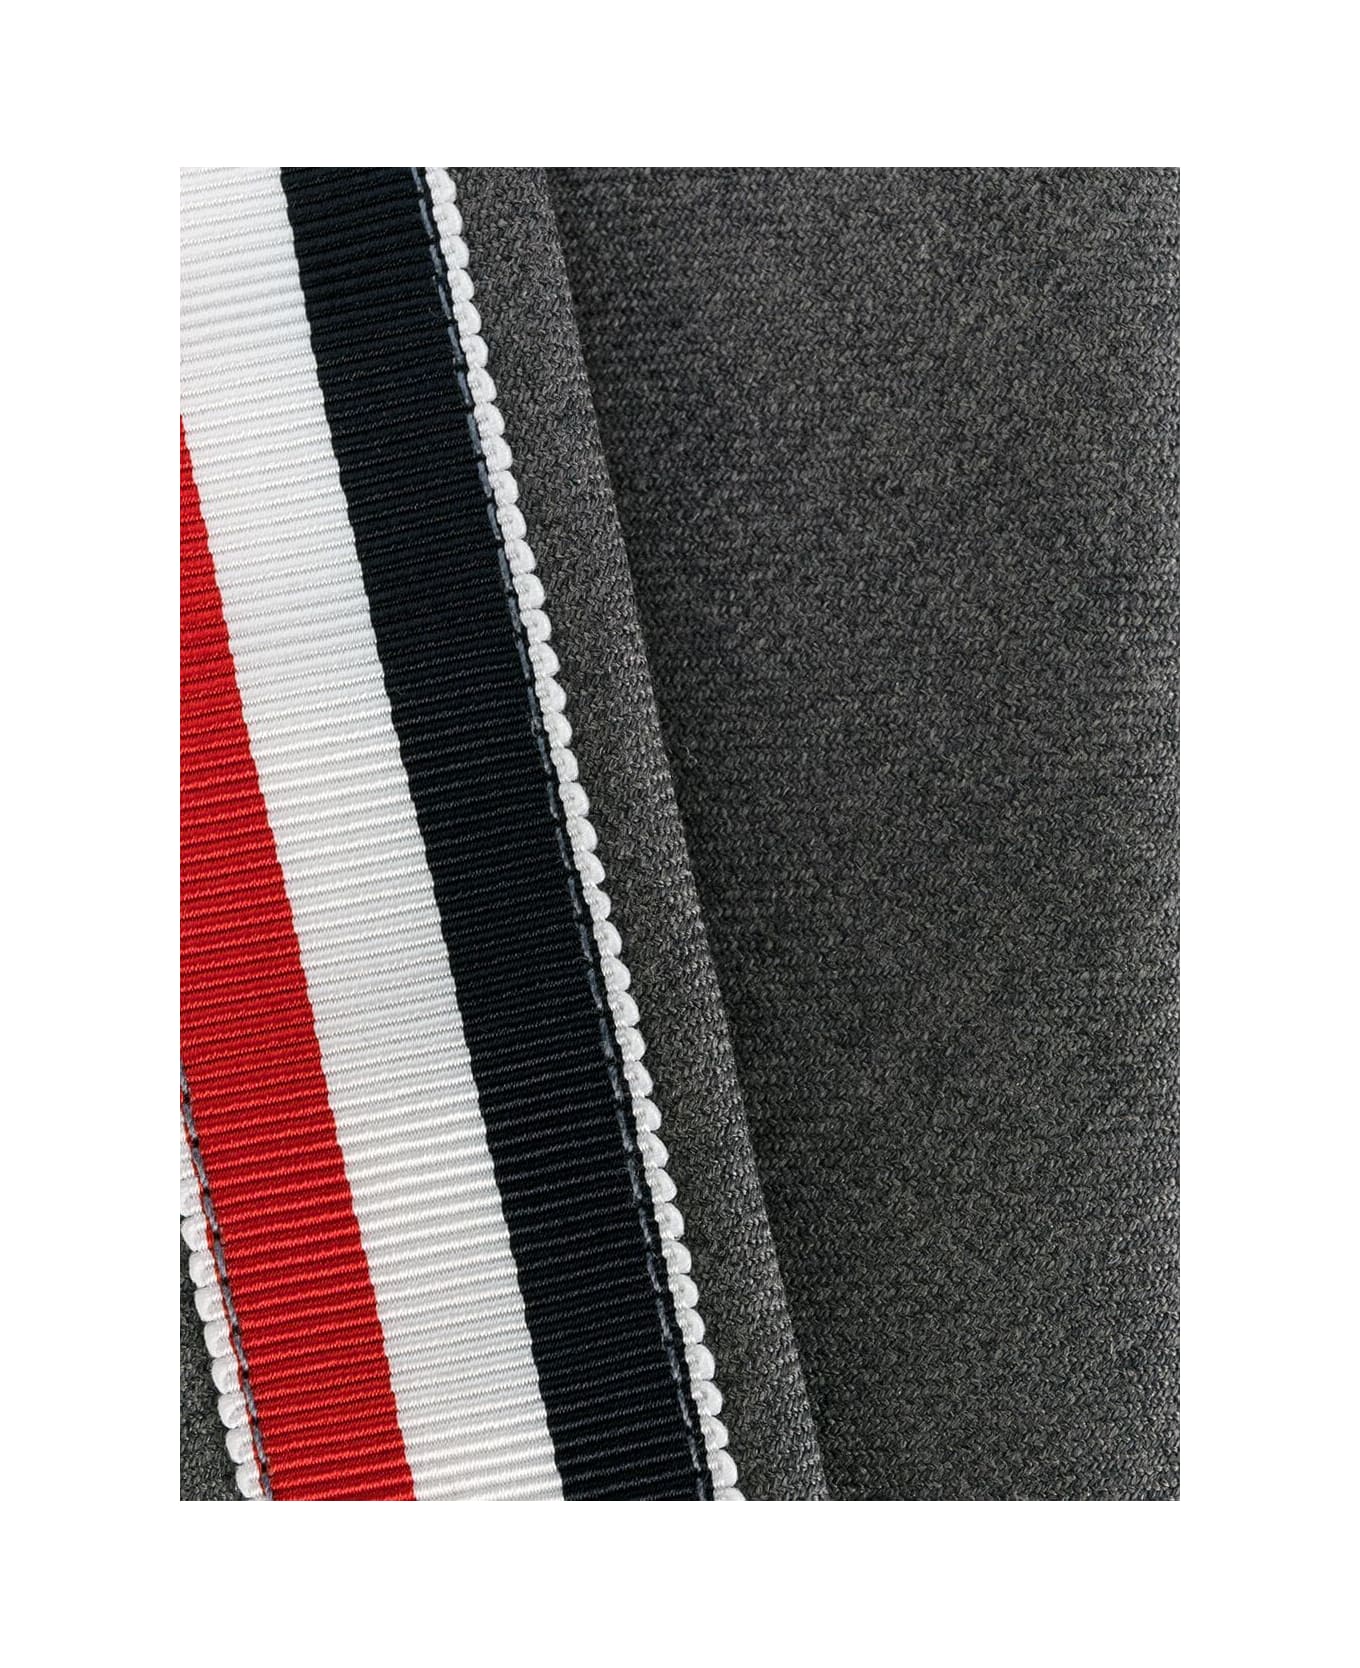 Thom Browne Classic Tie In Super 120 S Twill - Med Grey